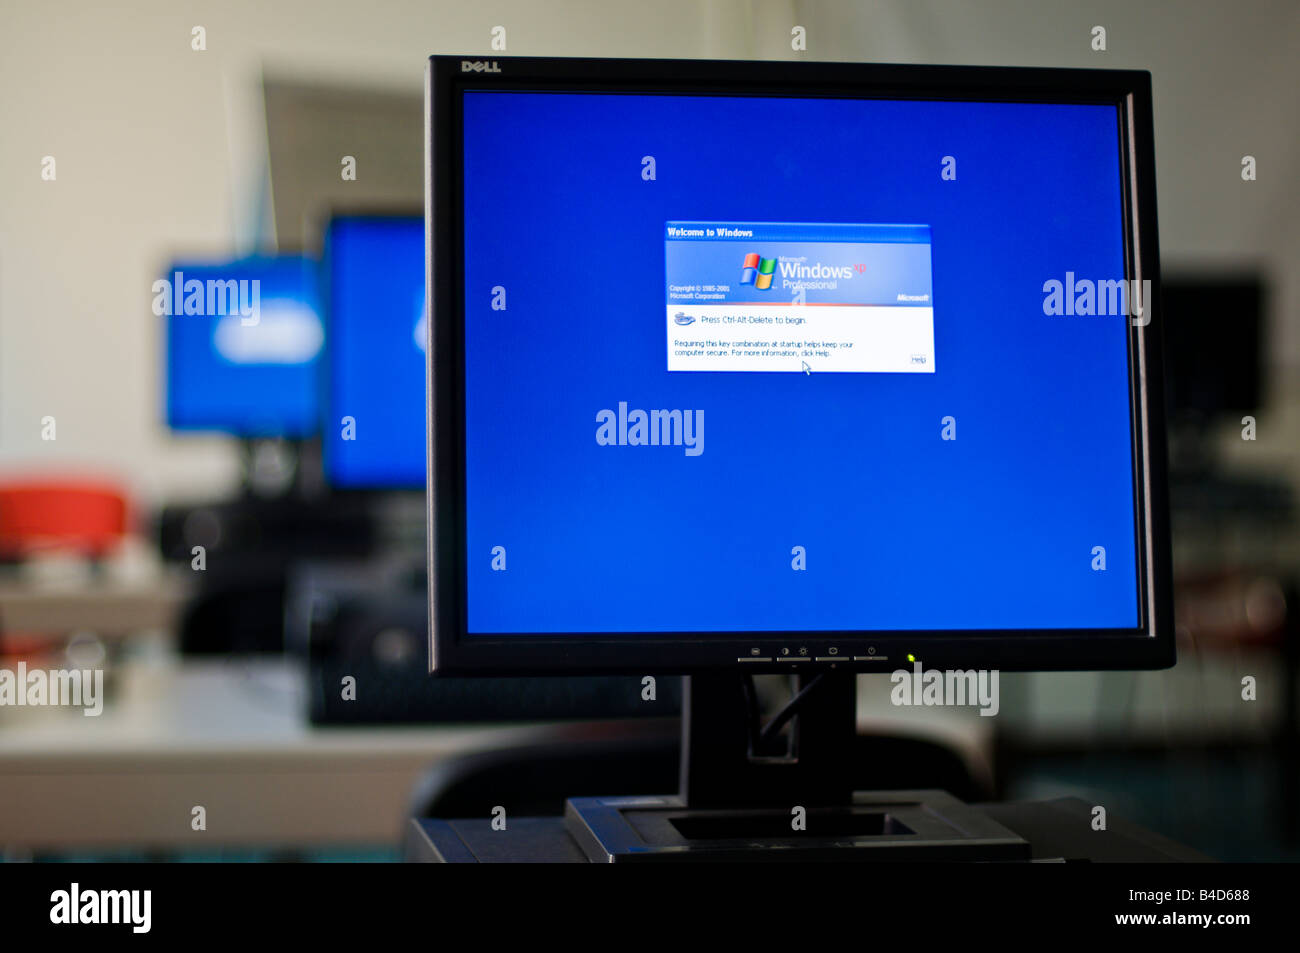 Three Dell monitors in a training room showing windows log-on screen Stock Photo